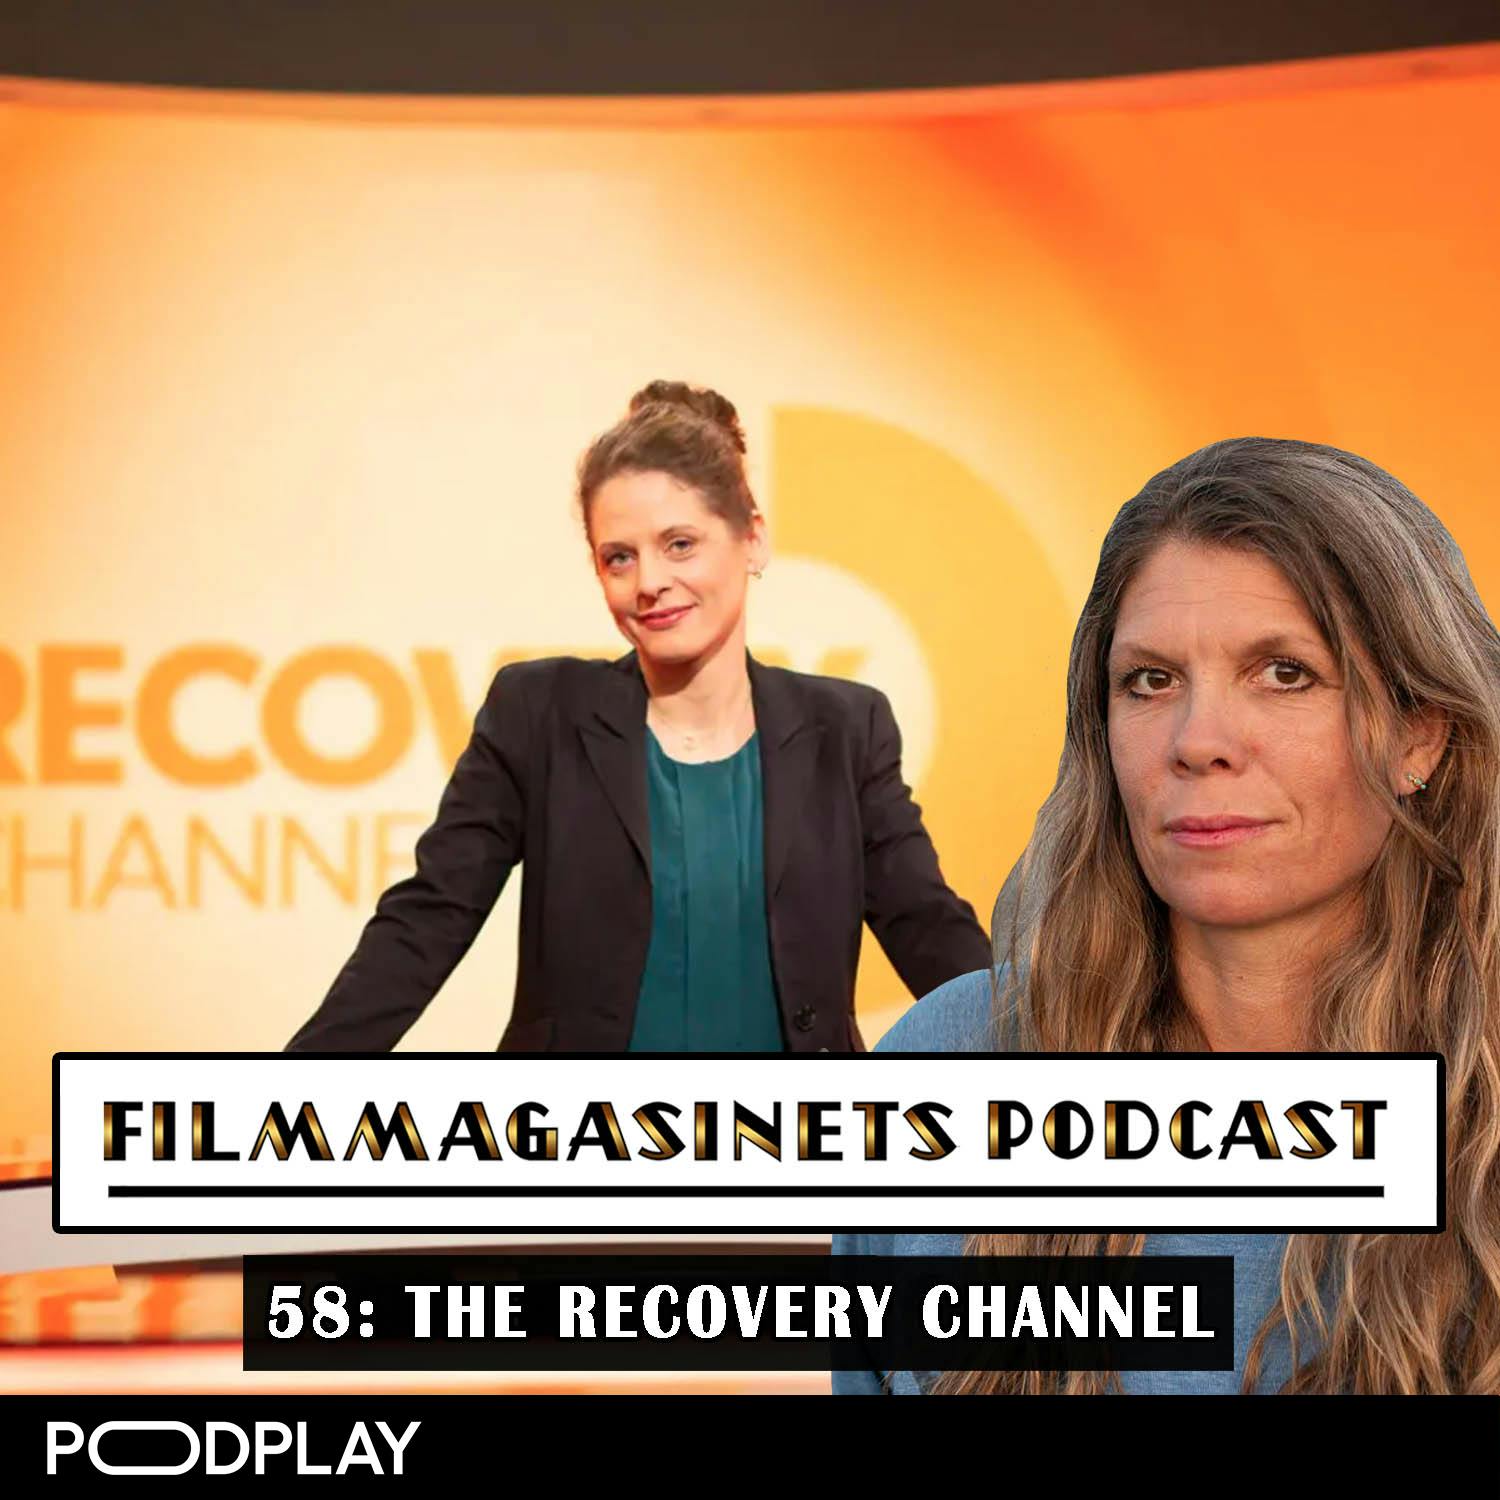 58: The Recovery Channel